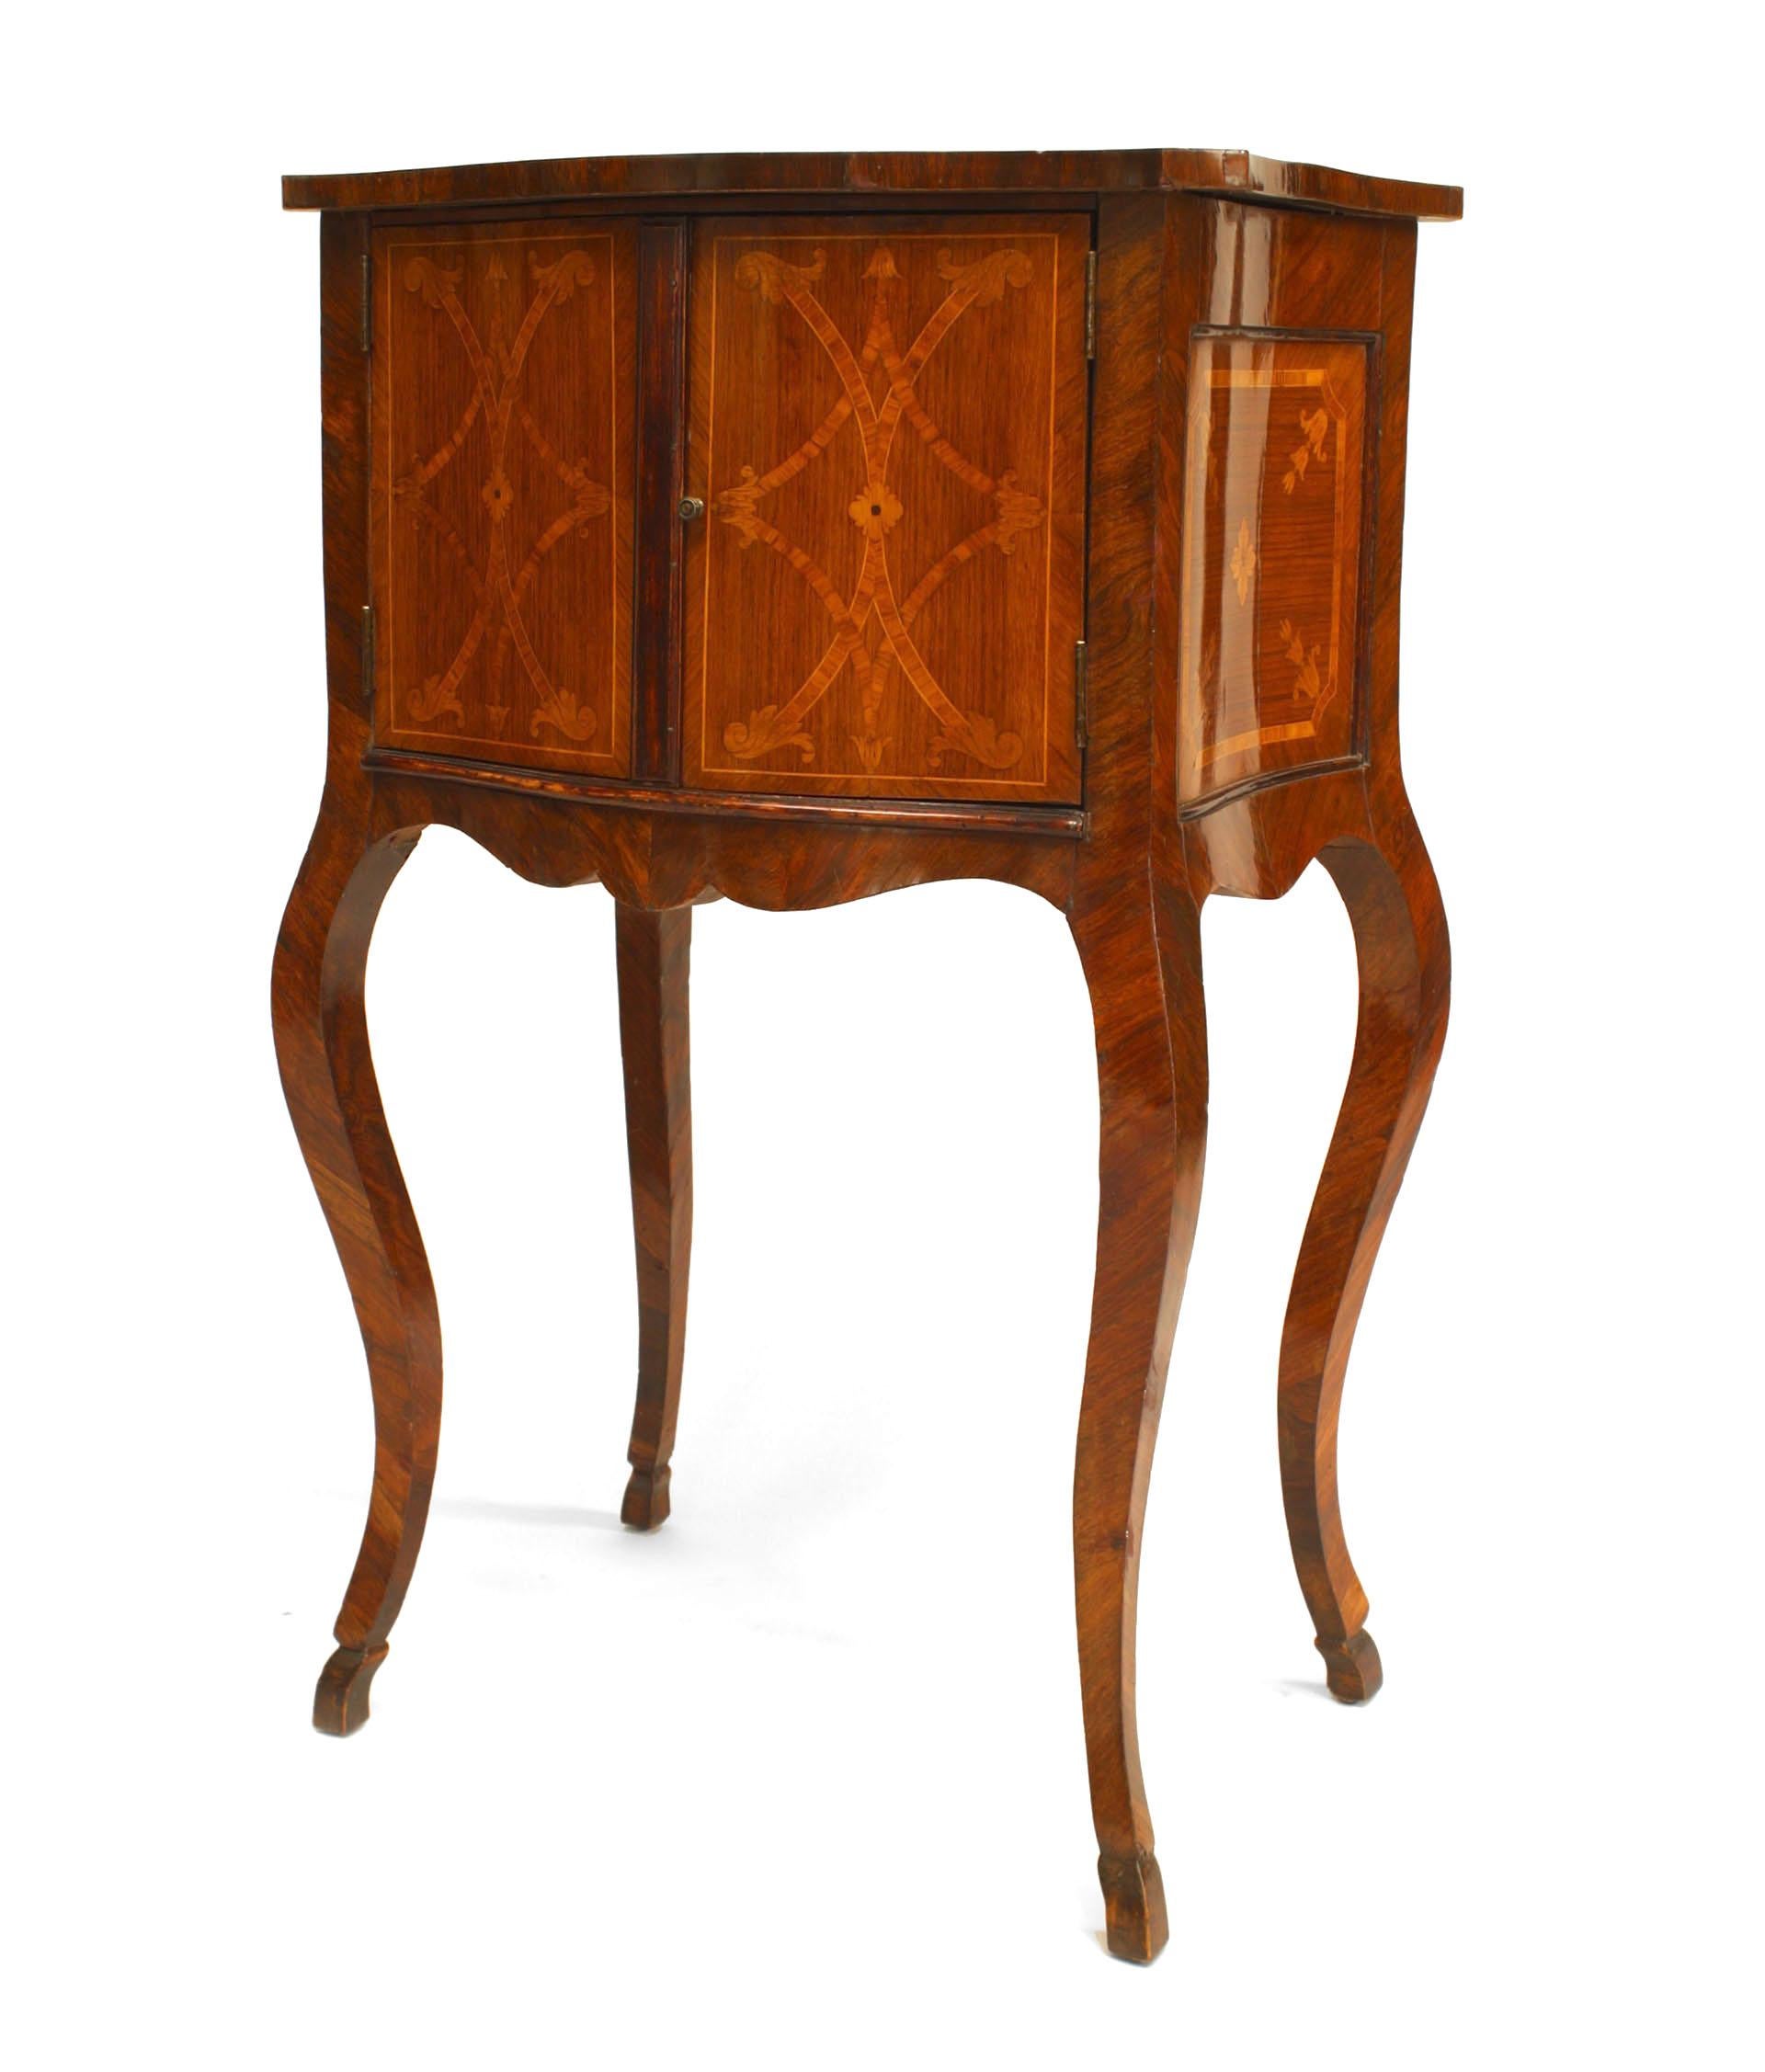 Italian Neoclassic-style (19th Century) small walnut bedside commode with tulipwood and marquetry inlaid design on top, sides, and back, and two front-facing doors.
